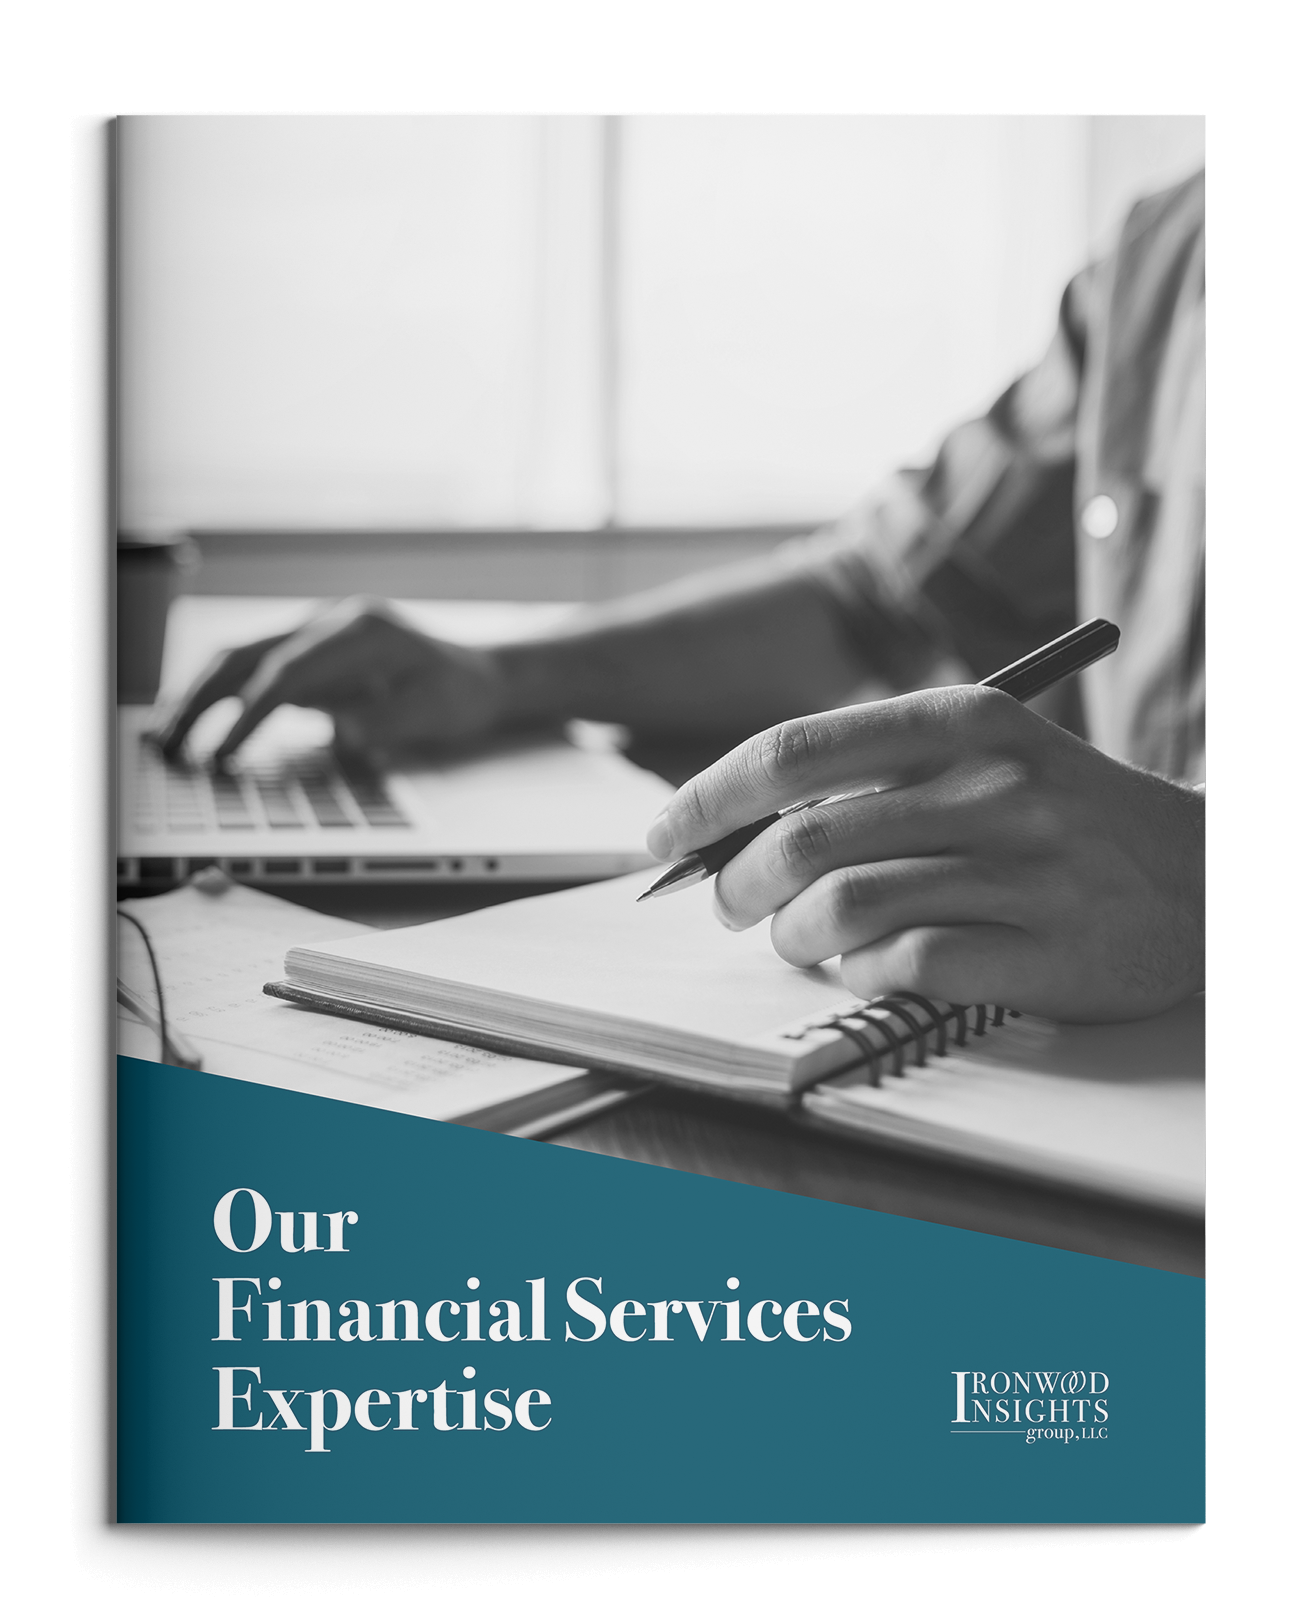 Our Financial Services Expertise